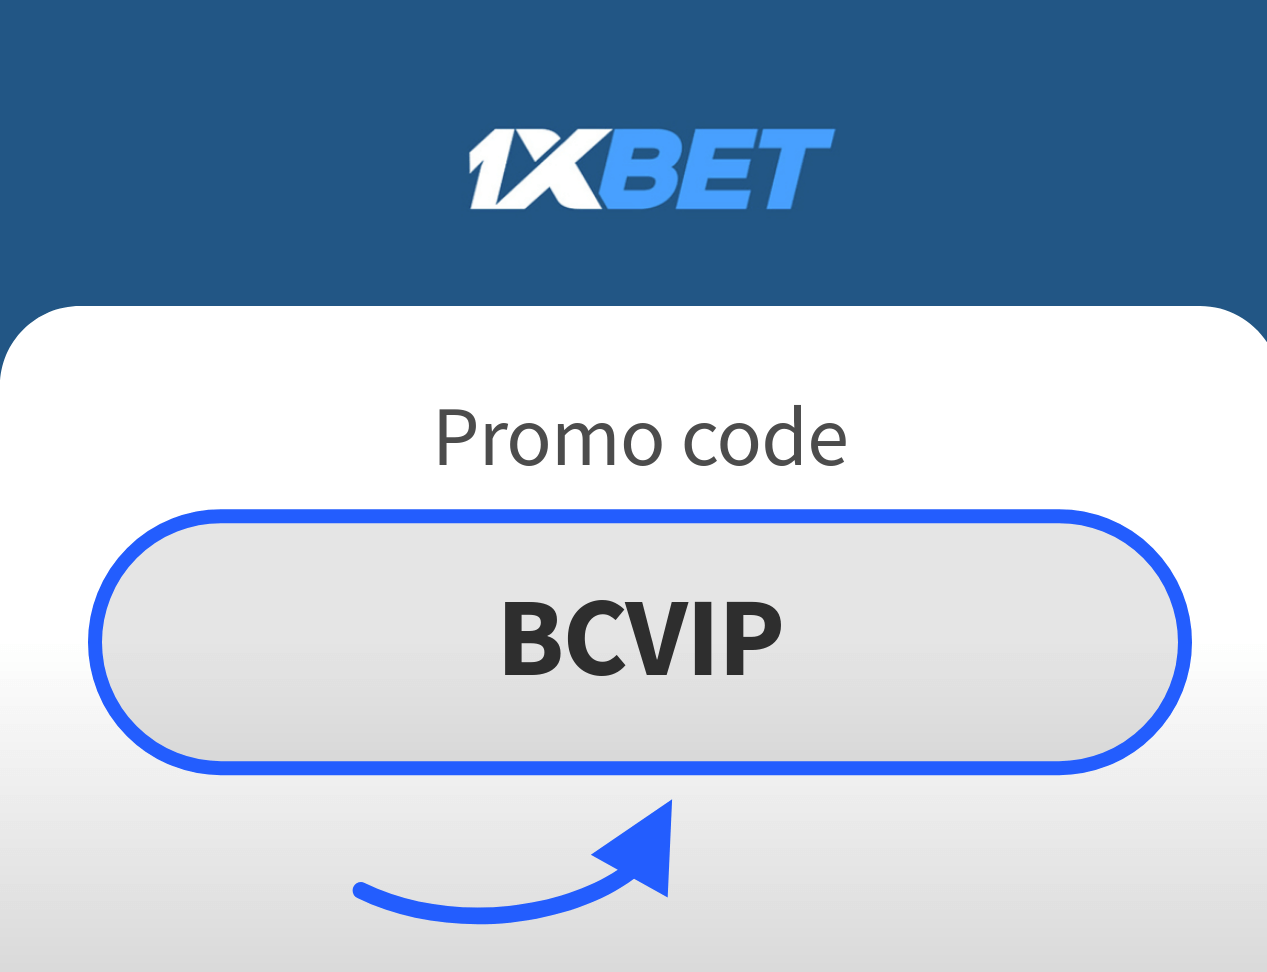 Why You Never See 1xbet ฝากเงินไม่เข้า That Actually Works